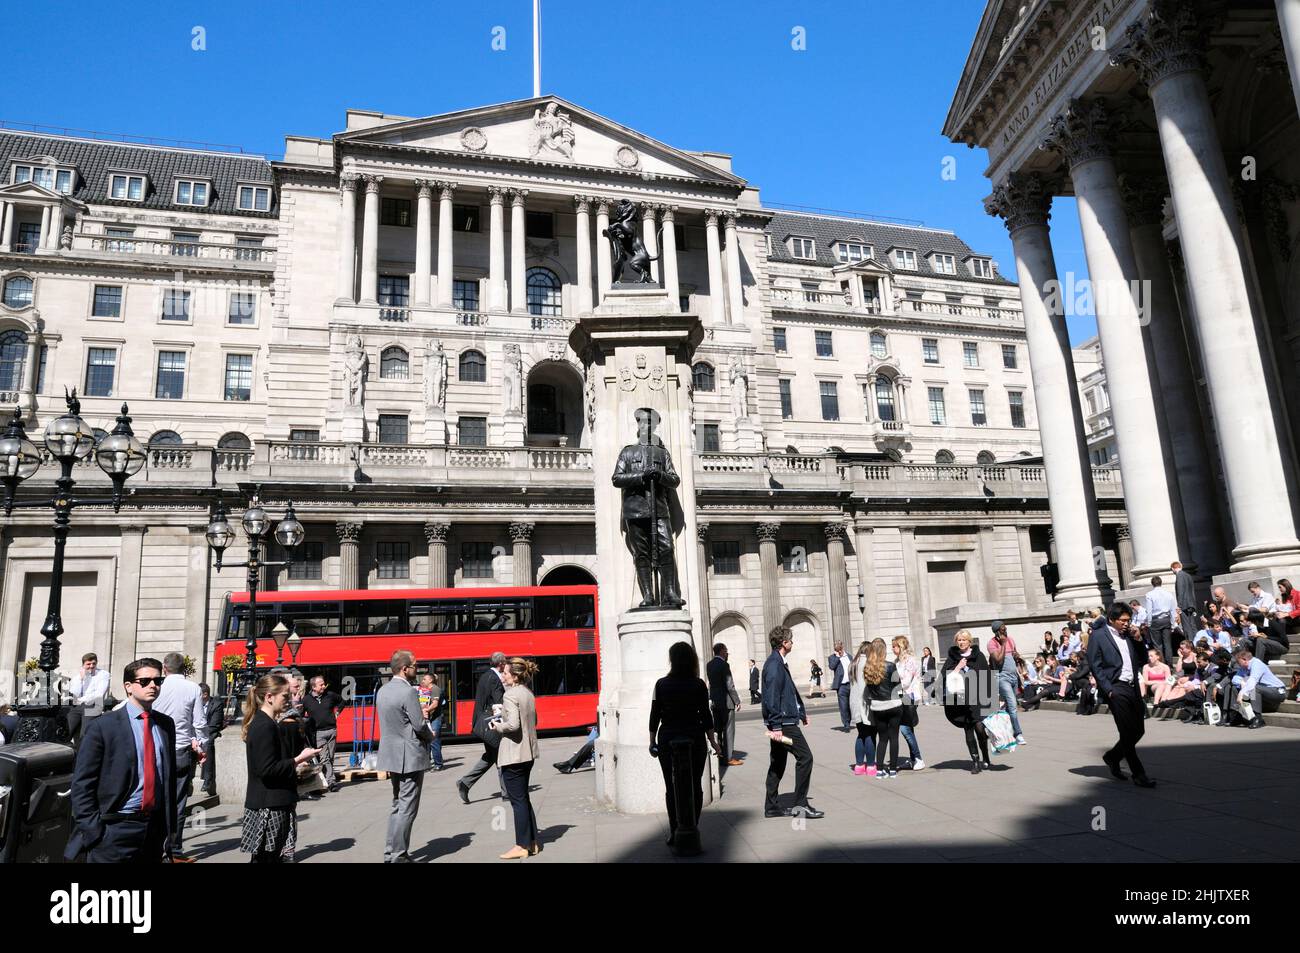 Bank of England and London troupes War Memorial, Threadneedle Street, City of London, Angleterre, Royaume-Uni Banque D'Images